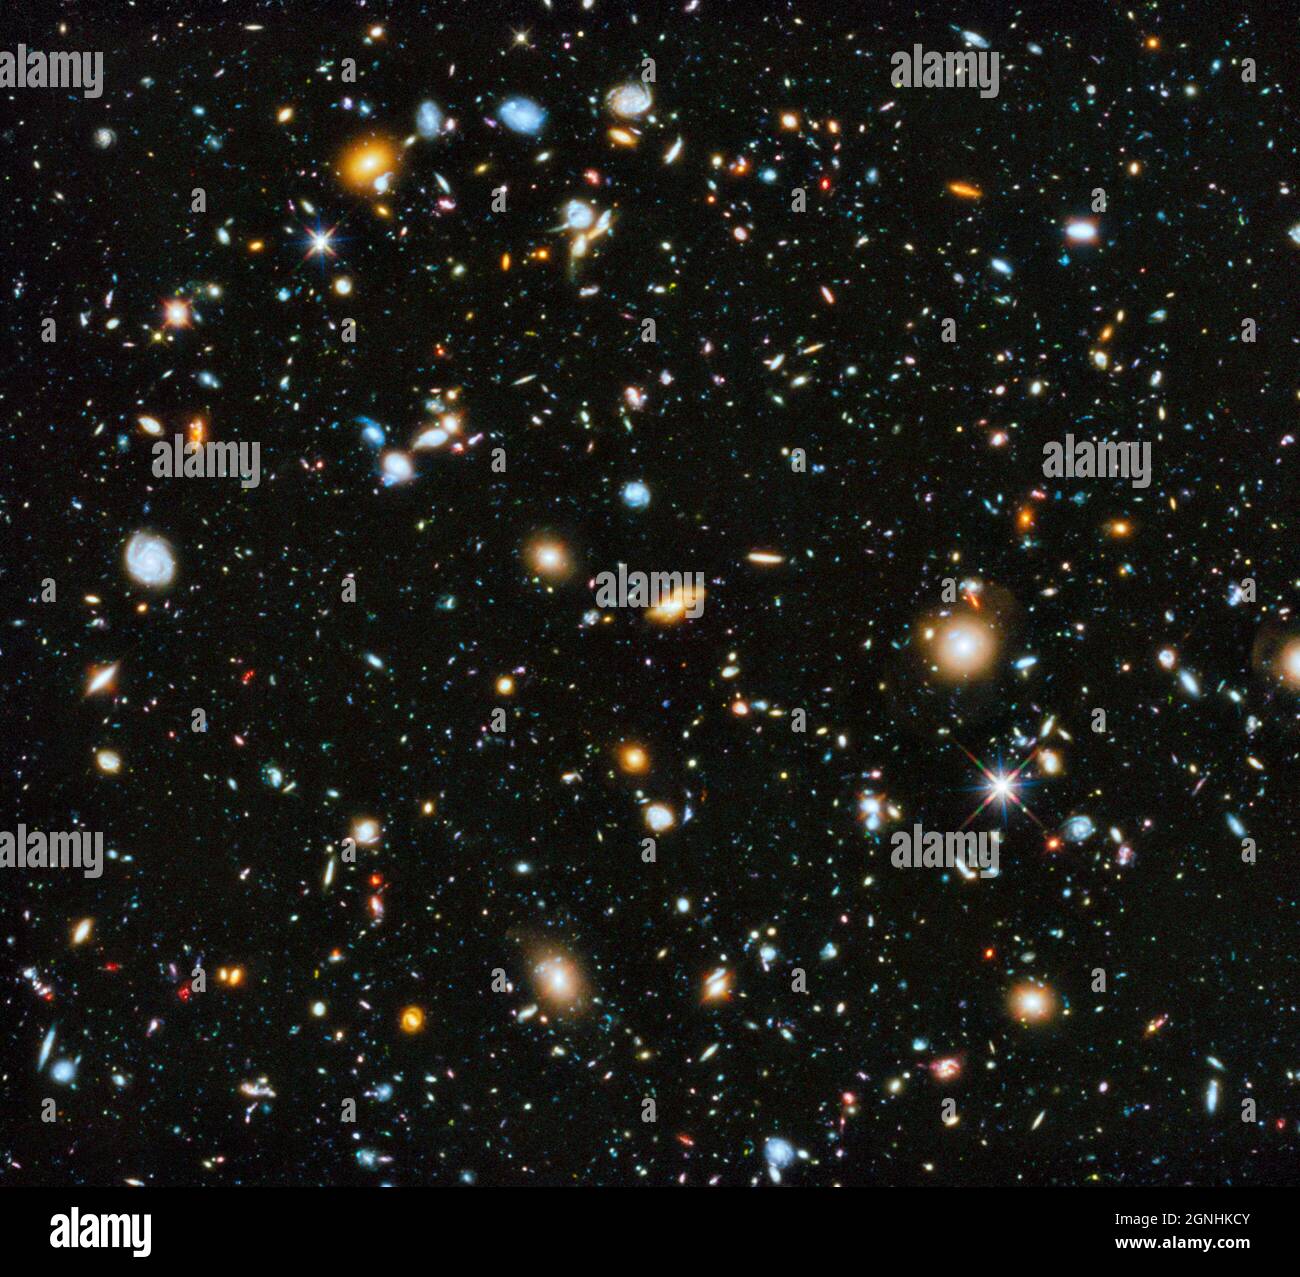 The famous Hubble Ultra Deep Field, containing 10,000 distant galaxies. The area of this image is one 26 millionth of the sky, from which we can infer that the visible universe contains 260 billion galaxies. . Image source NASA/ESA Hubble Space Telescope Stock Photo